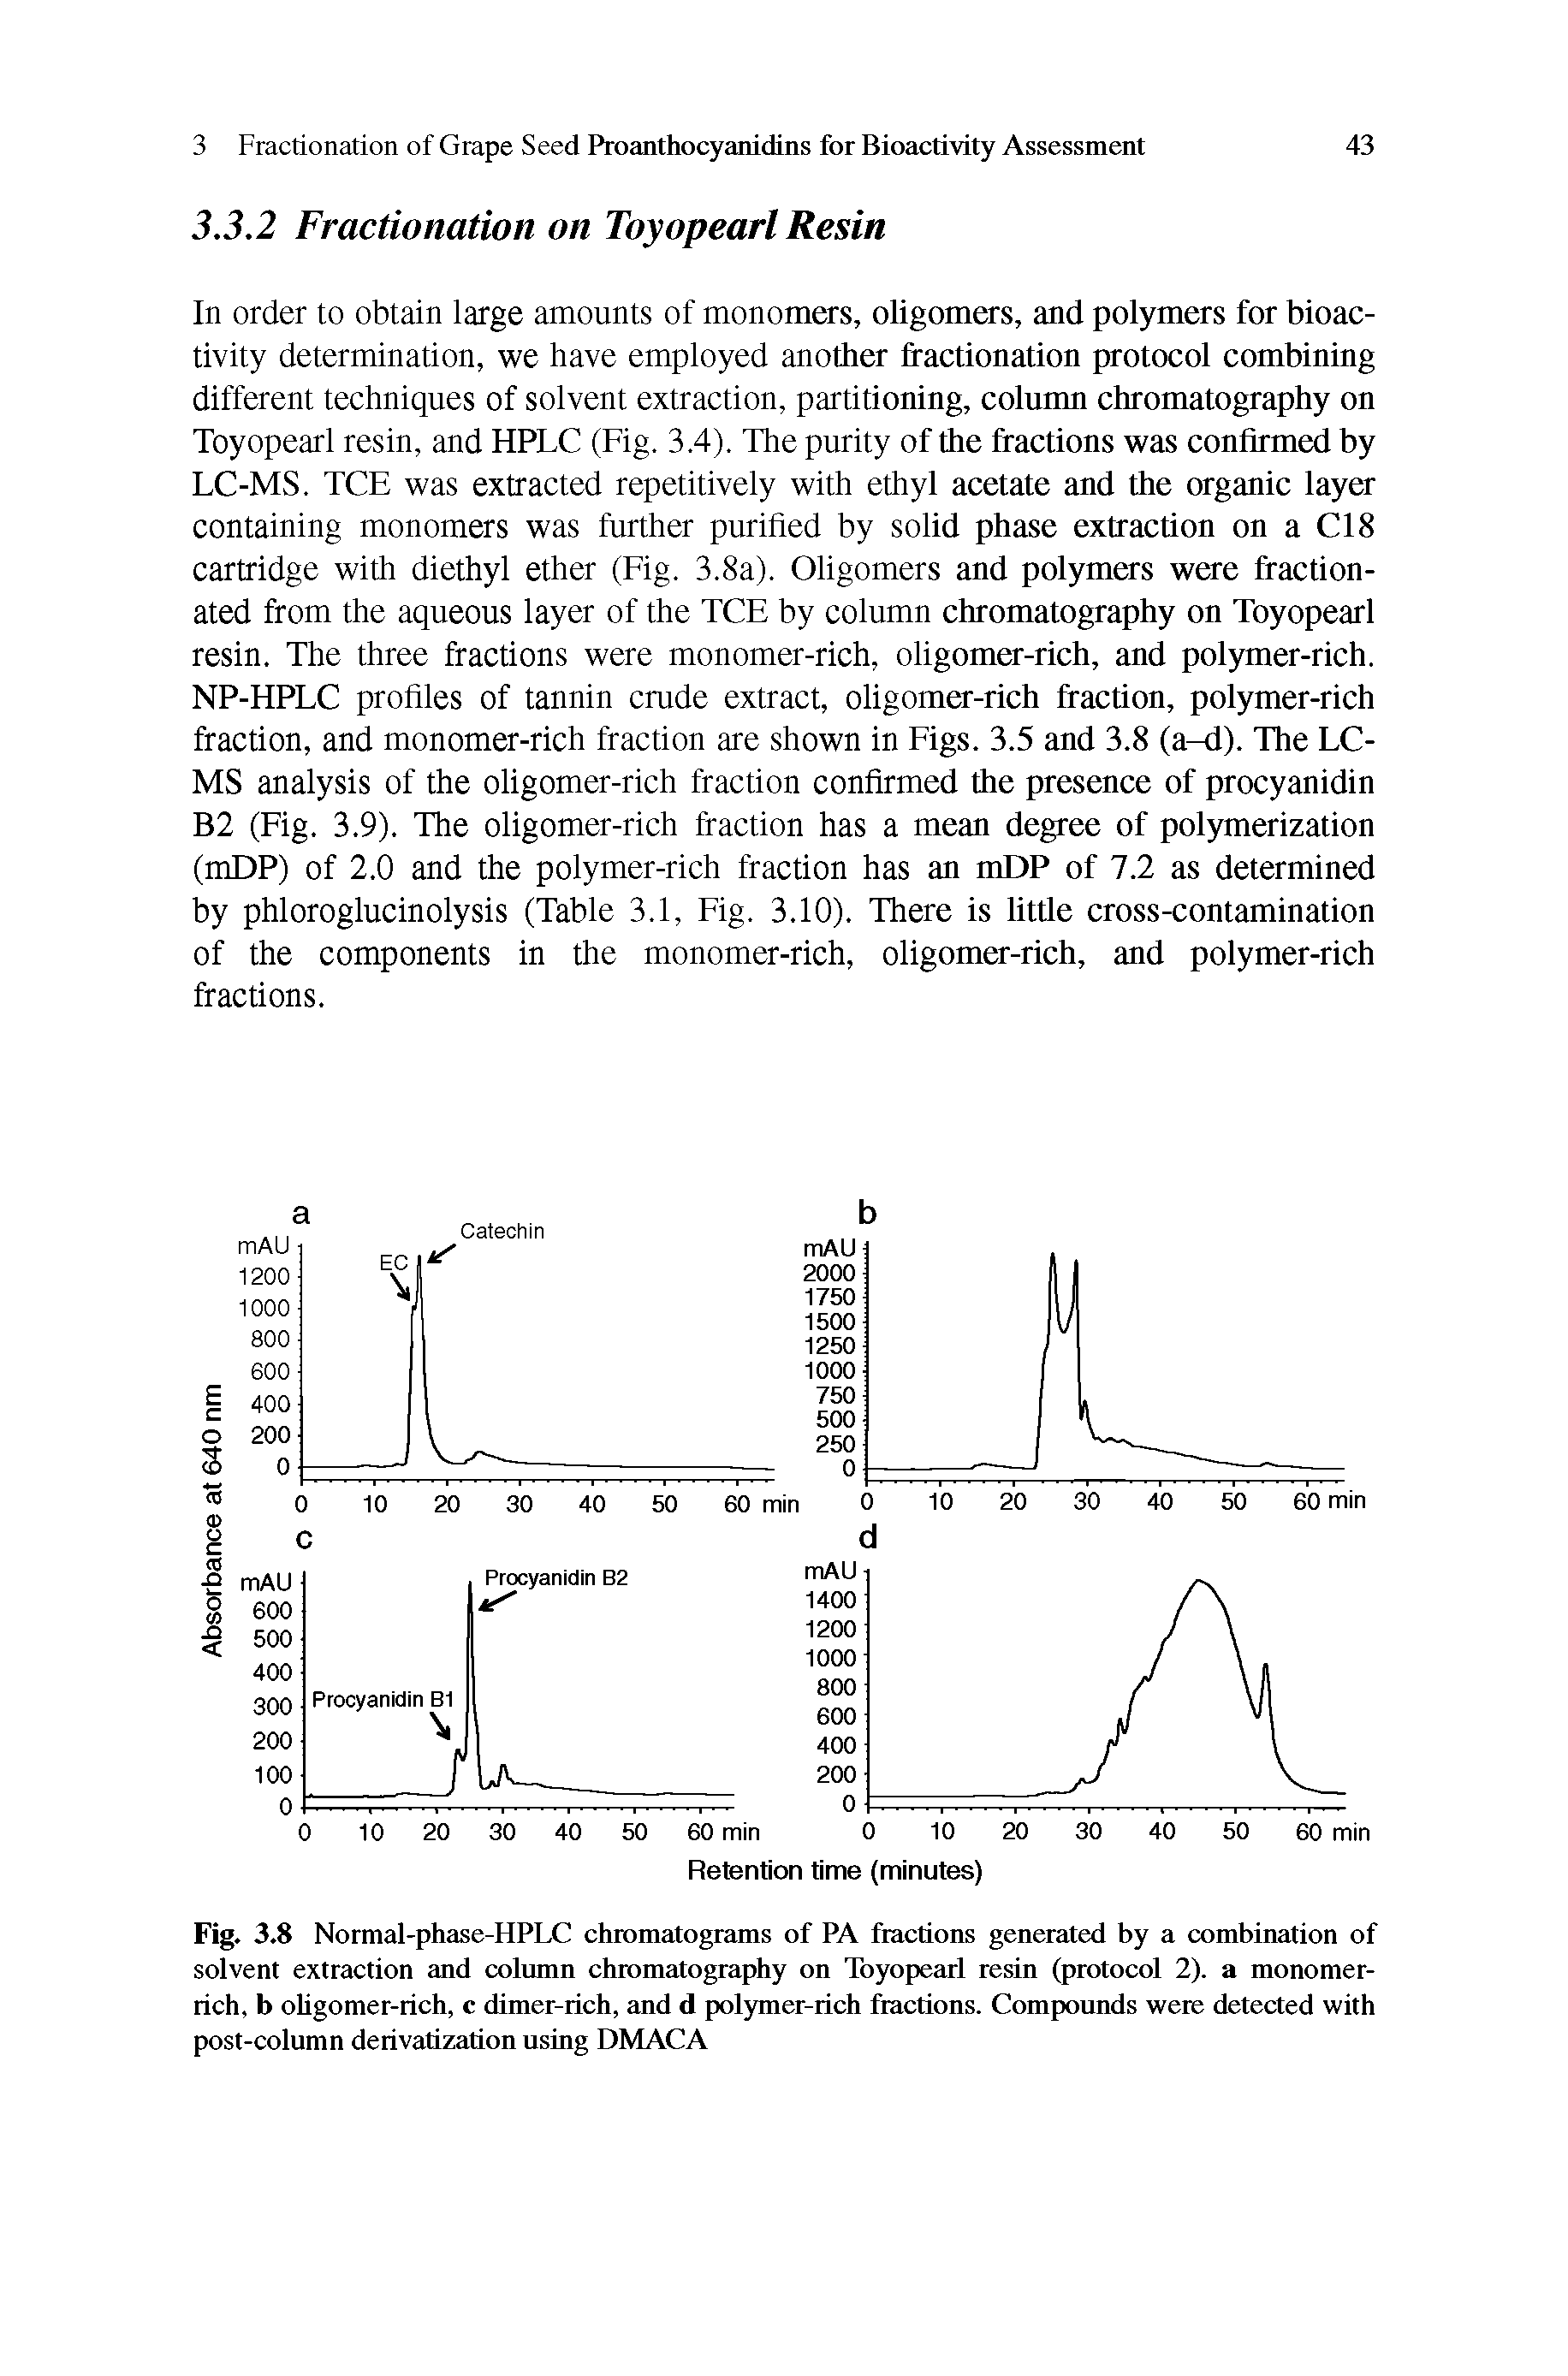 Fig. 3.8 Normal-phase-HPLC chromatograms of PA fractions generated by a combination of solvent extraction and column chromatography on Toyopearl resin (protocol 2). a monomer-rich, b ohgomer-rich, c dimer-rich, and d polymer-rich fractions. Compounds were detected with post-column derivatization using DMACA...